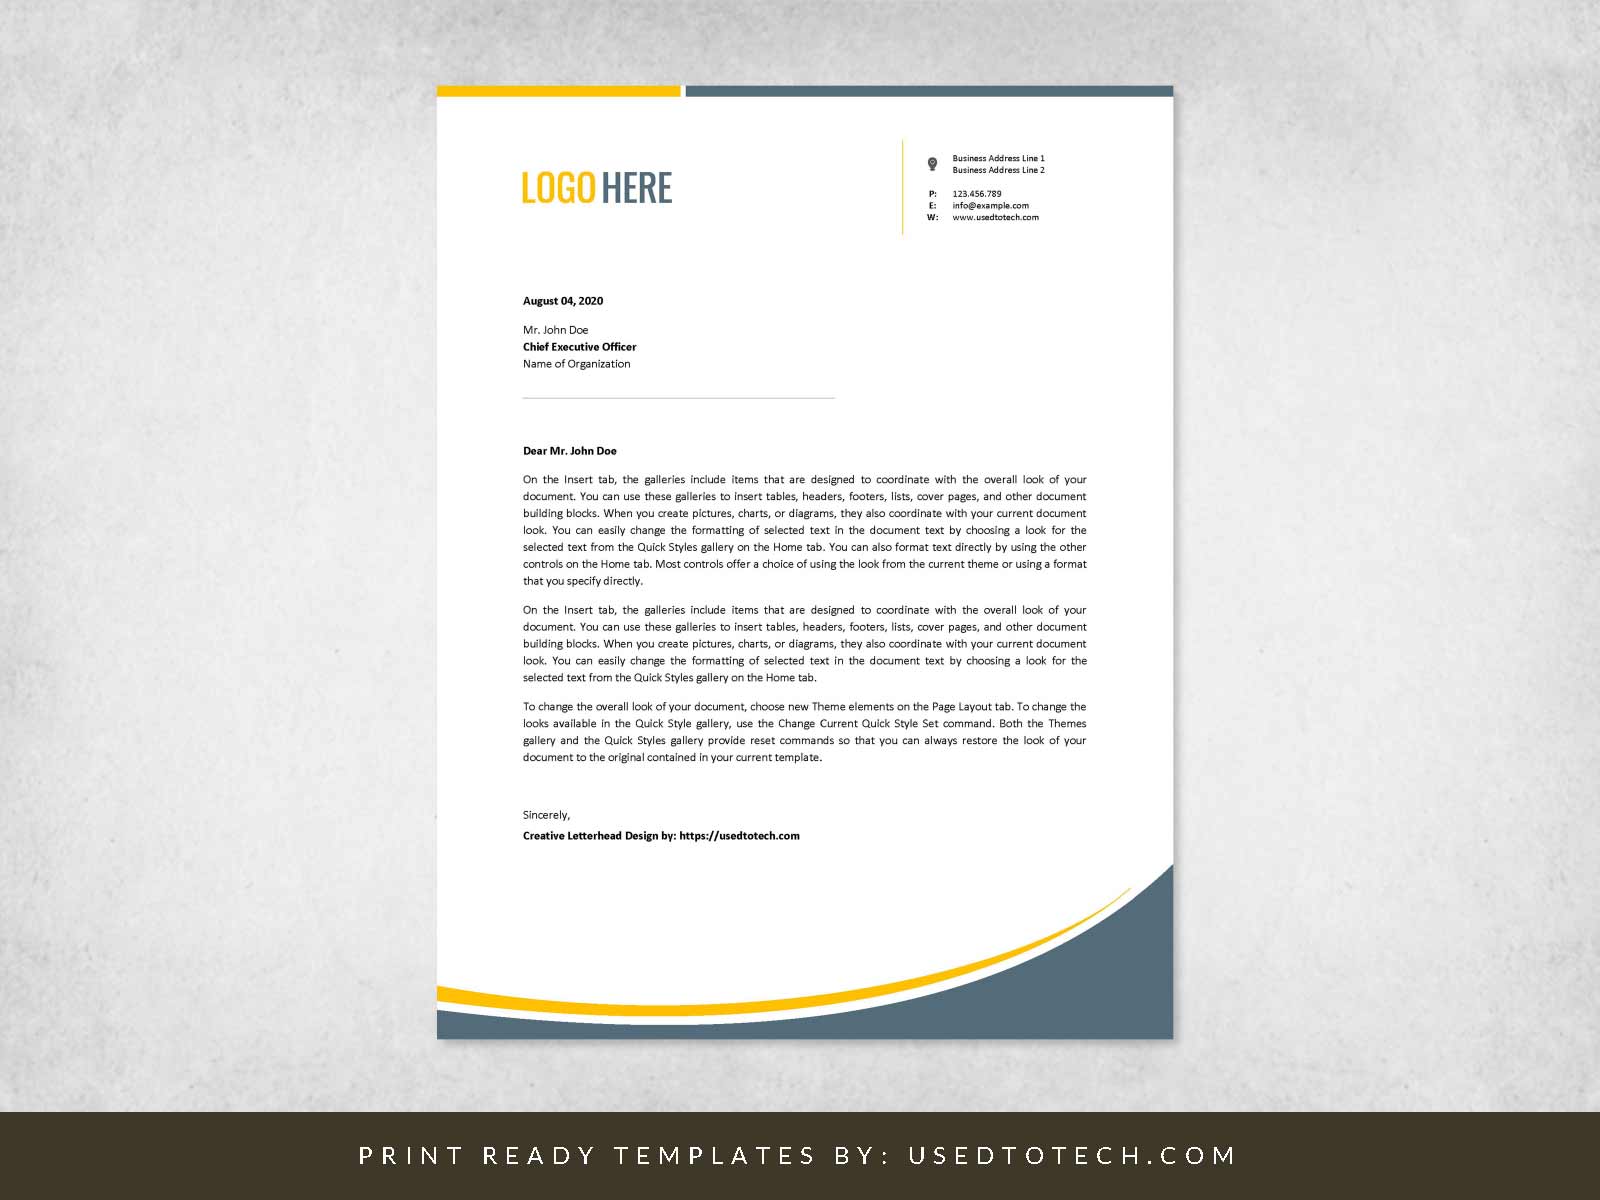 Word template for creative letterhead design - Used to Tech Inside Letterhead Text Template